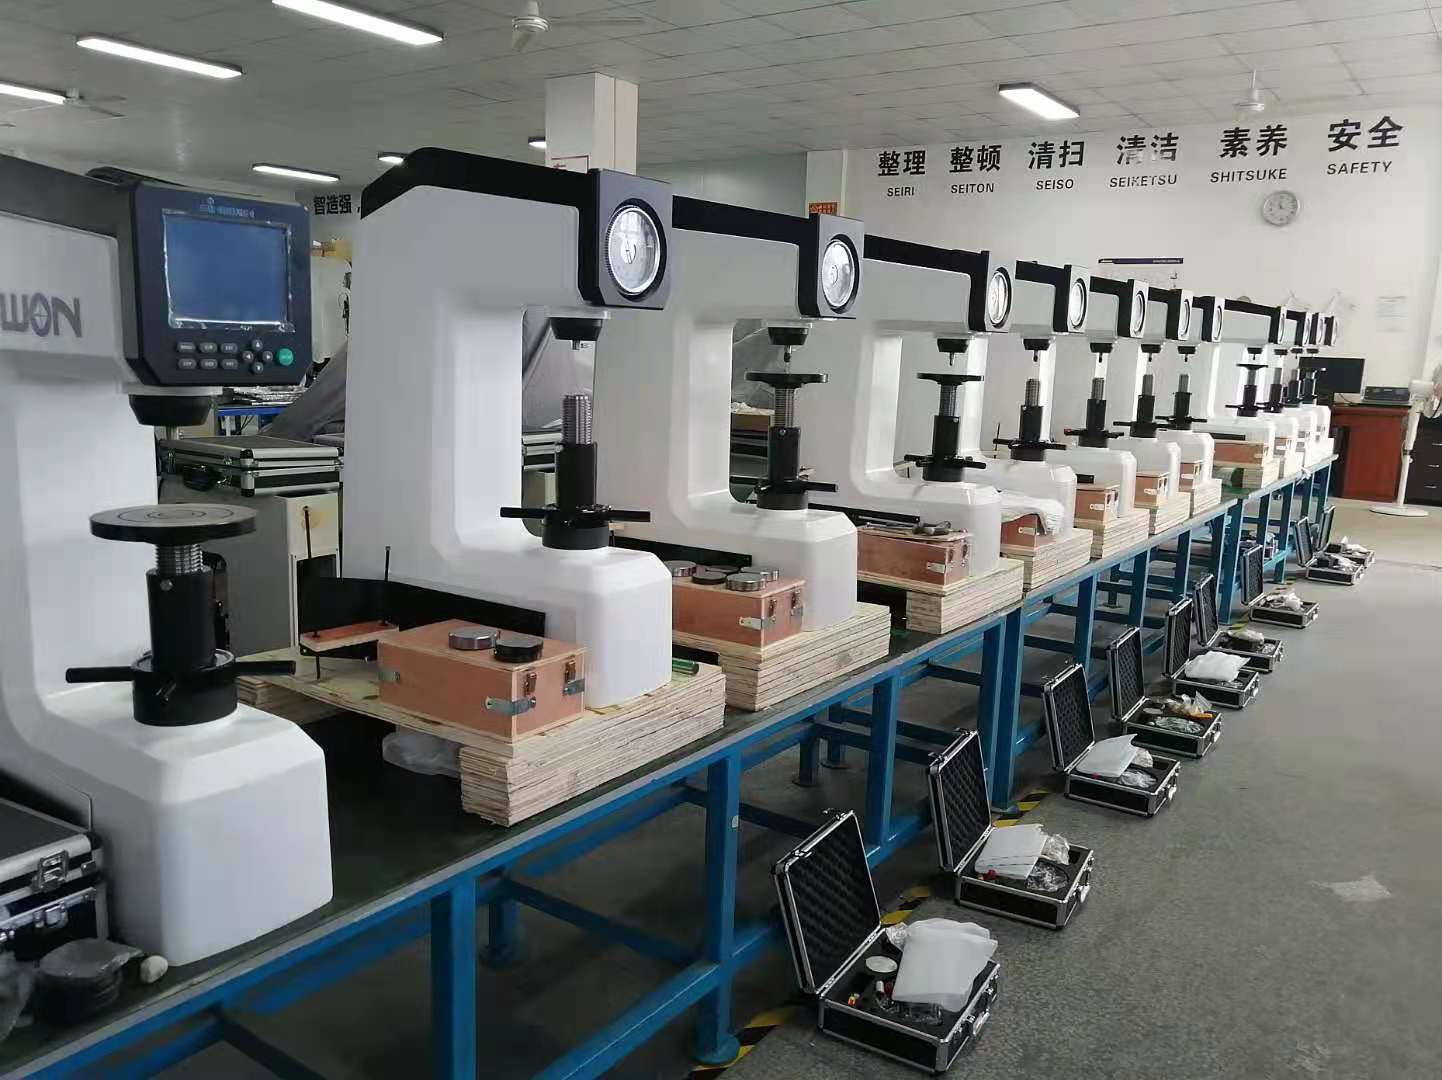 20 SETS OF SINOWON ROCKWELL HARDNESS TESTERS WERE SOLD IN JULY